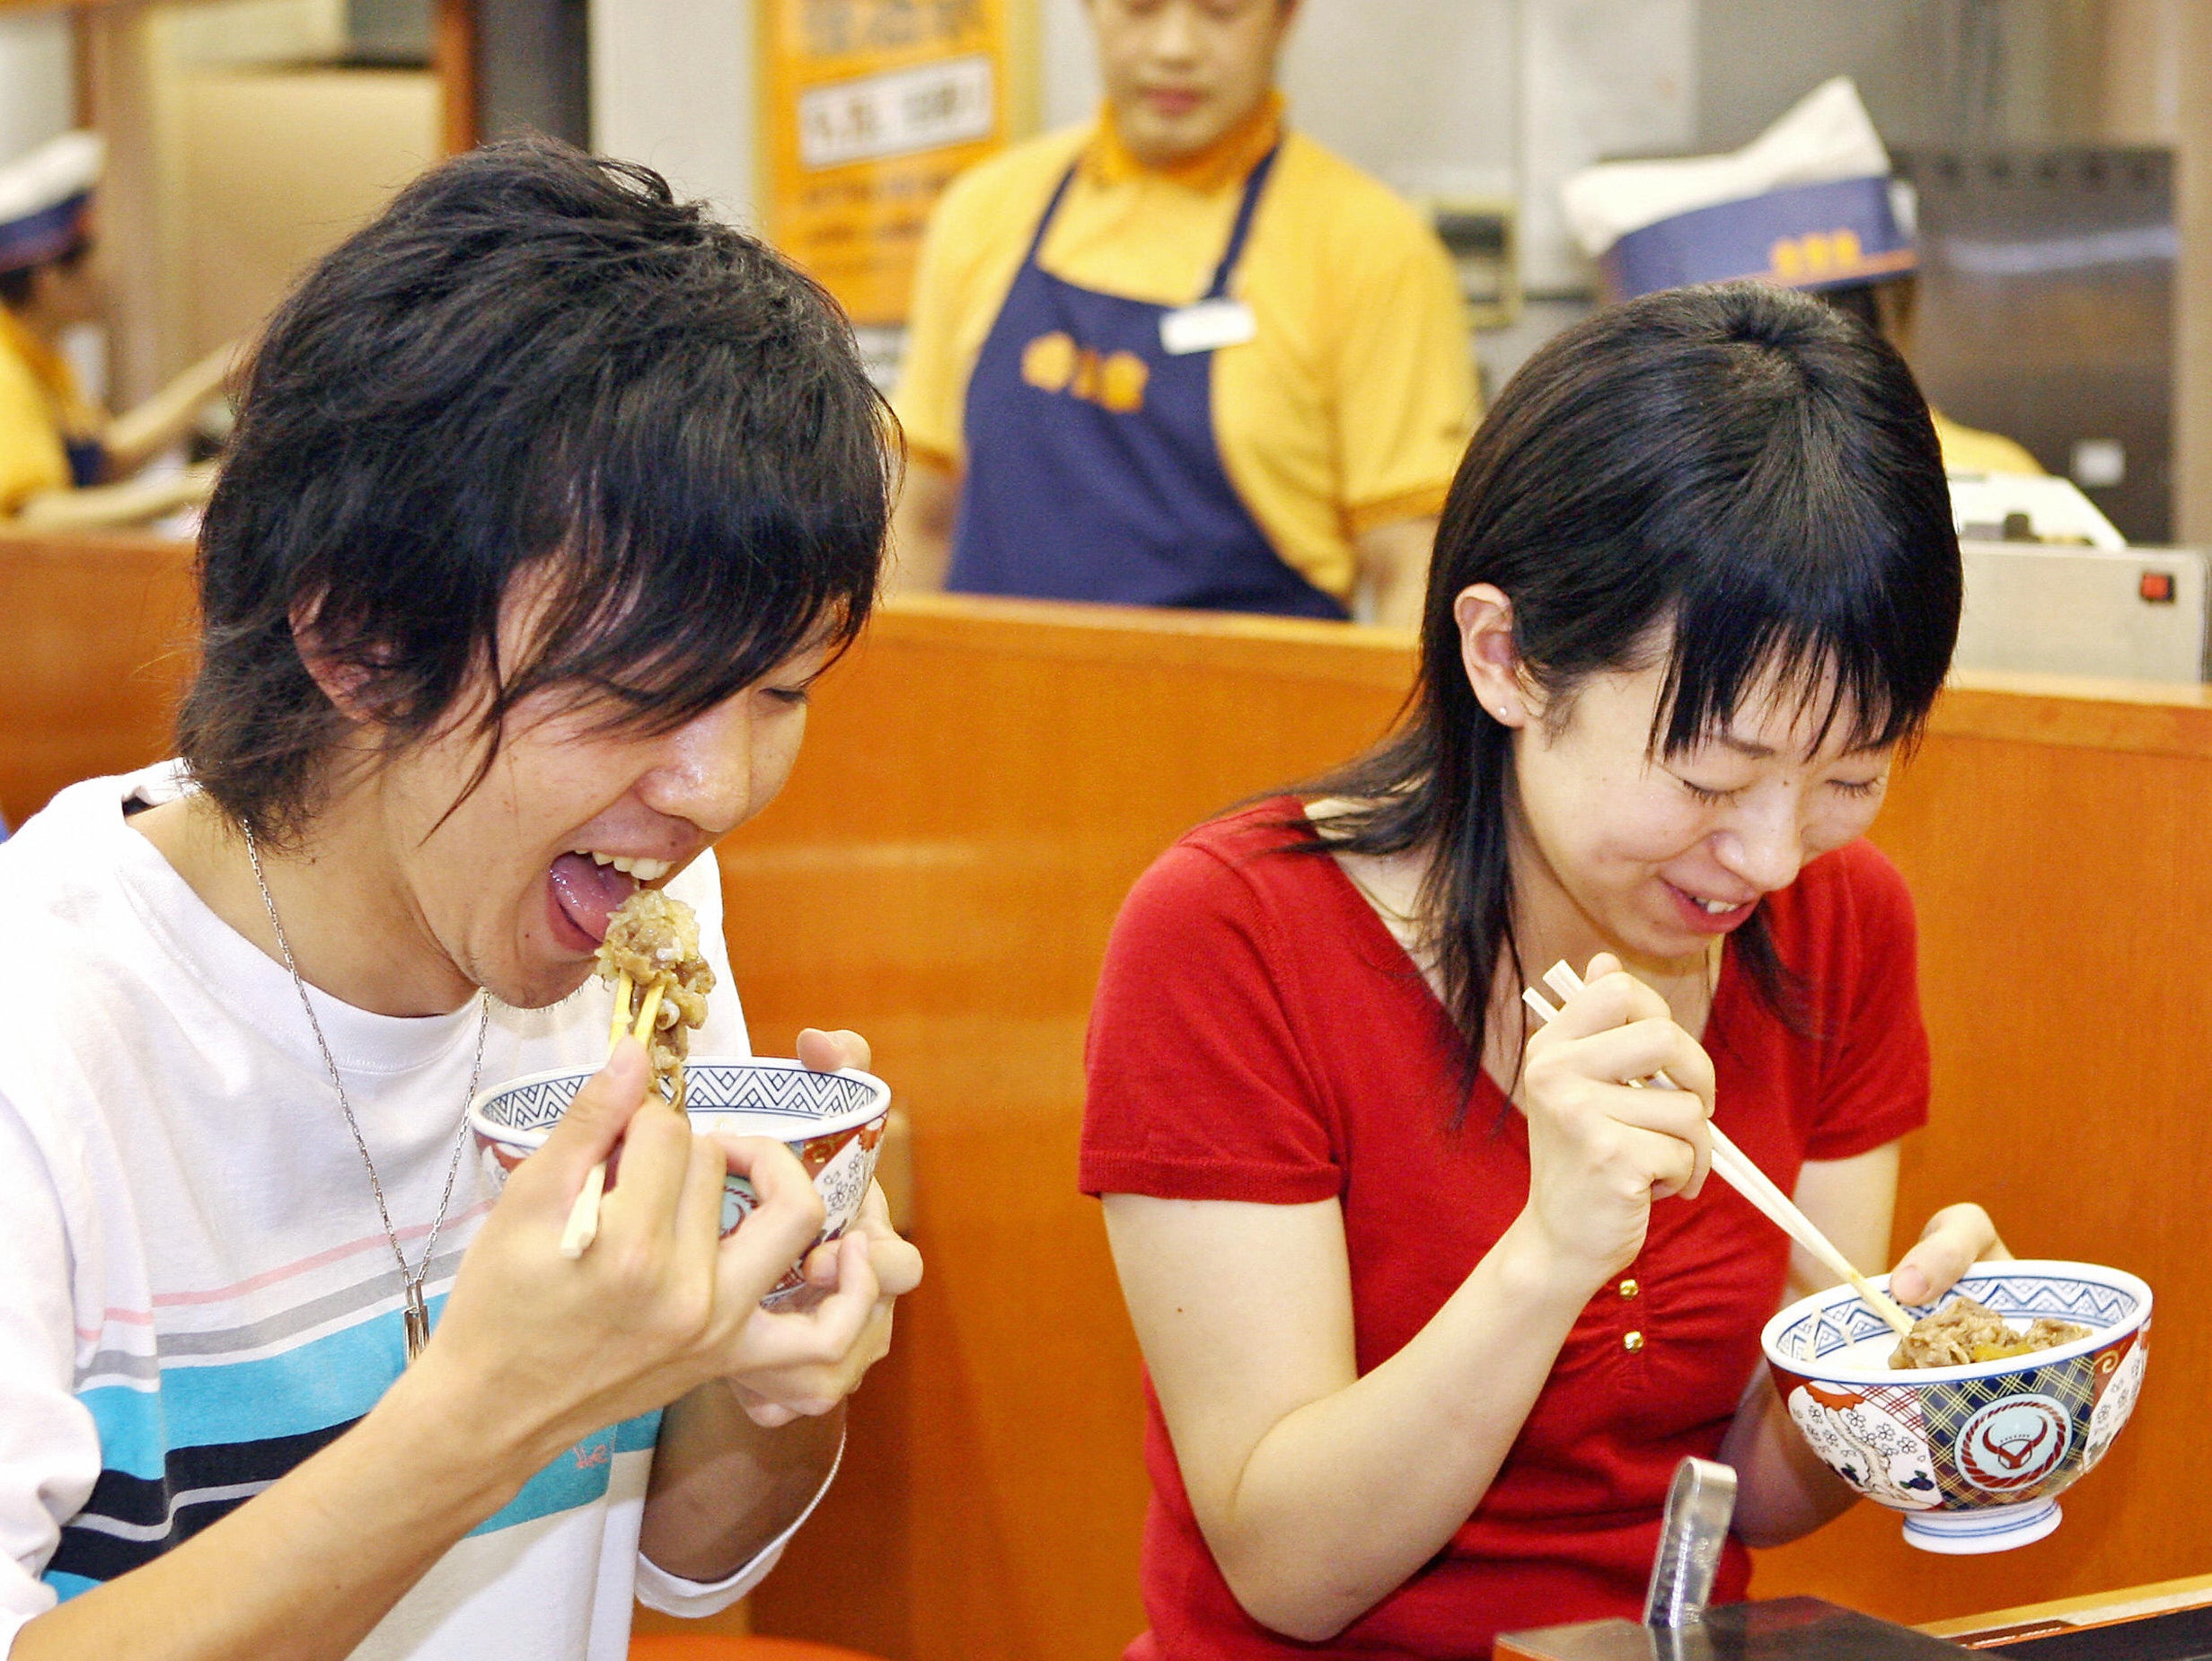 File A Japanese couple enjoy bowls of “gyudon”, a beef and rice dish commonly referred to as beef bowls, at a Yoshinoya fast food restaurant